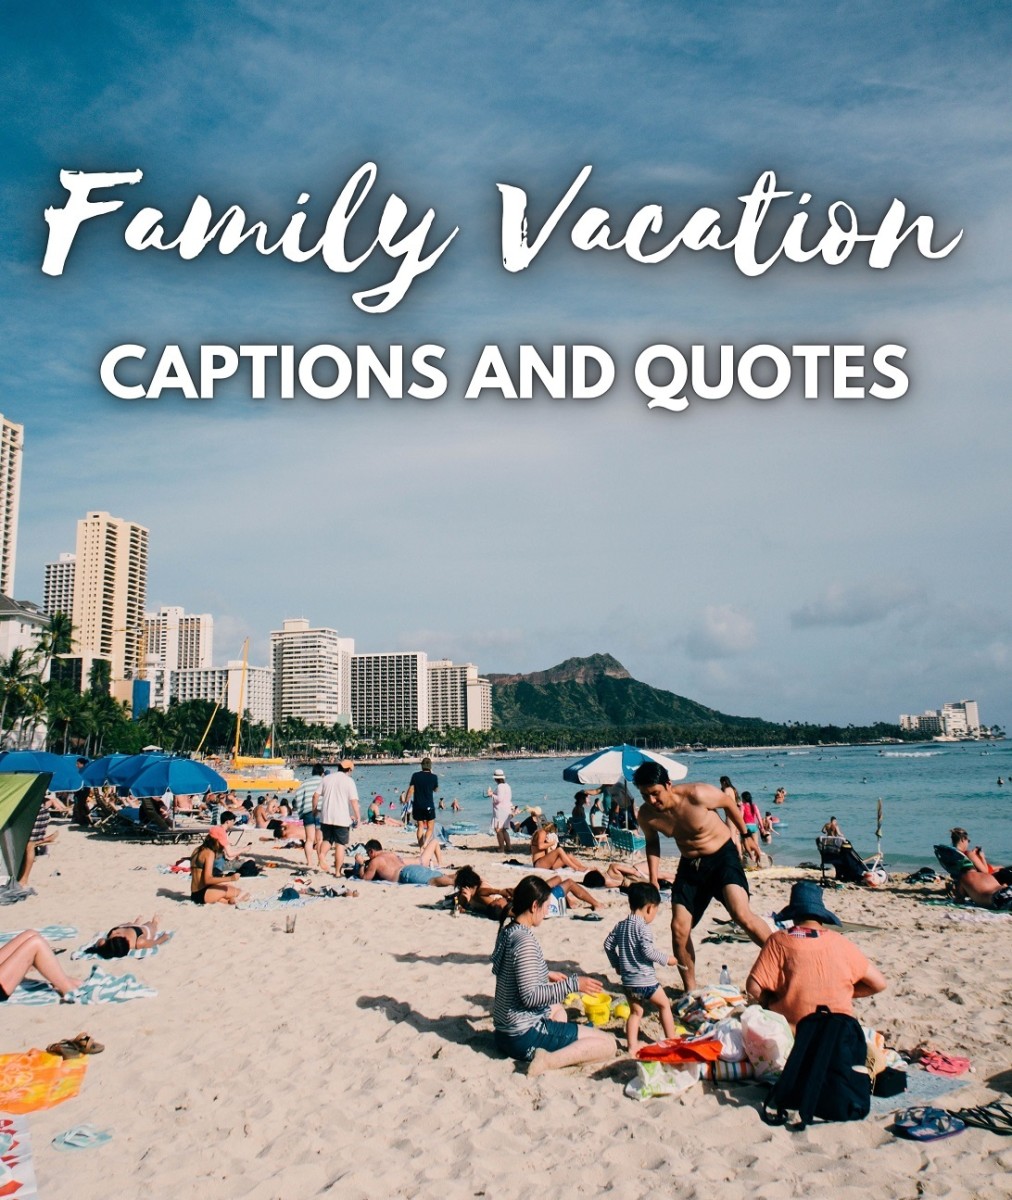 150+ Family Vacation Quotes and Caption Ideas for Instagram - TurboFuture